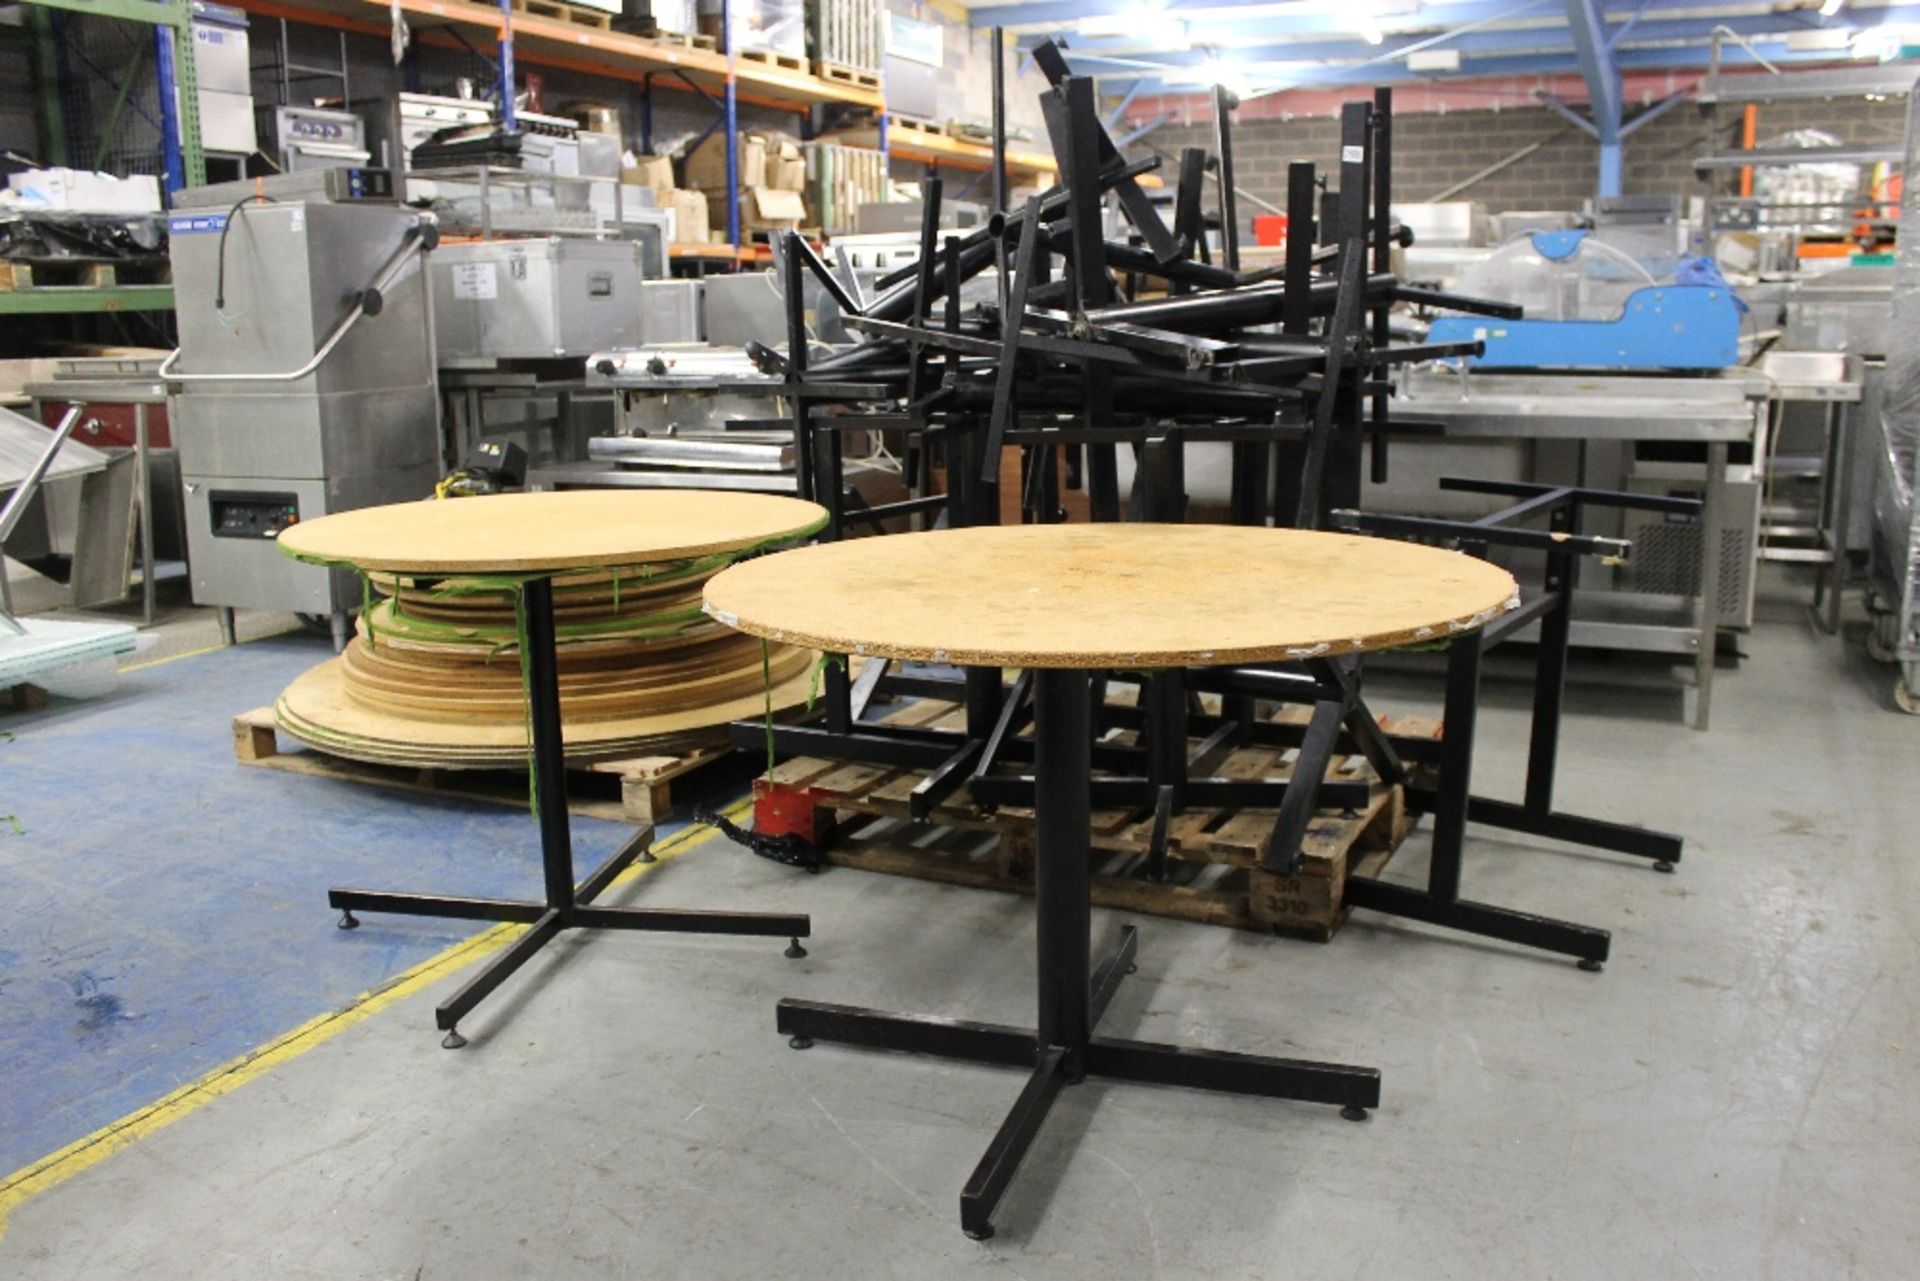 Job Lot of Banqueting Tables to be sold as 1 Lot – 27 in Total - 3 Sizes   4 x Large-10 Medium &